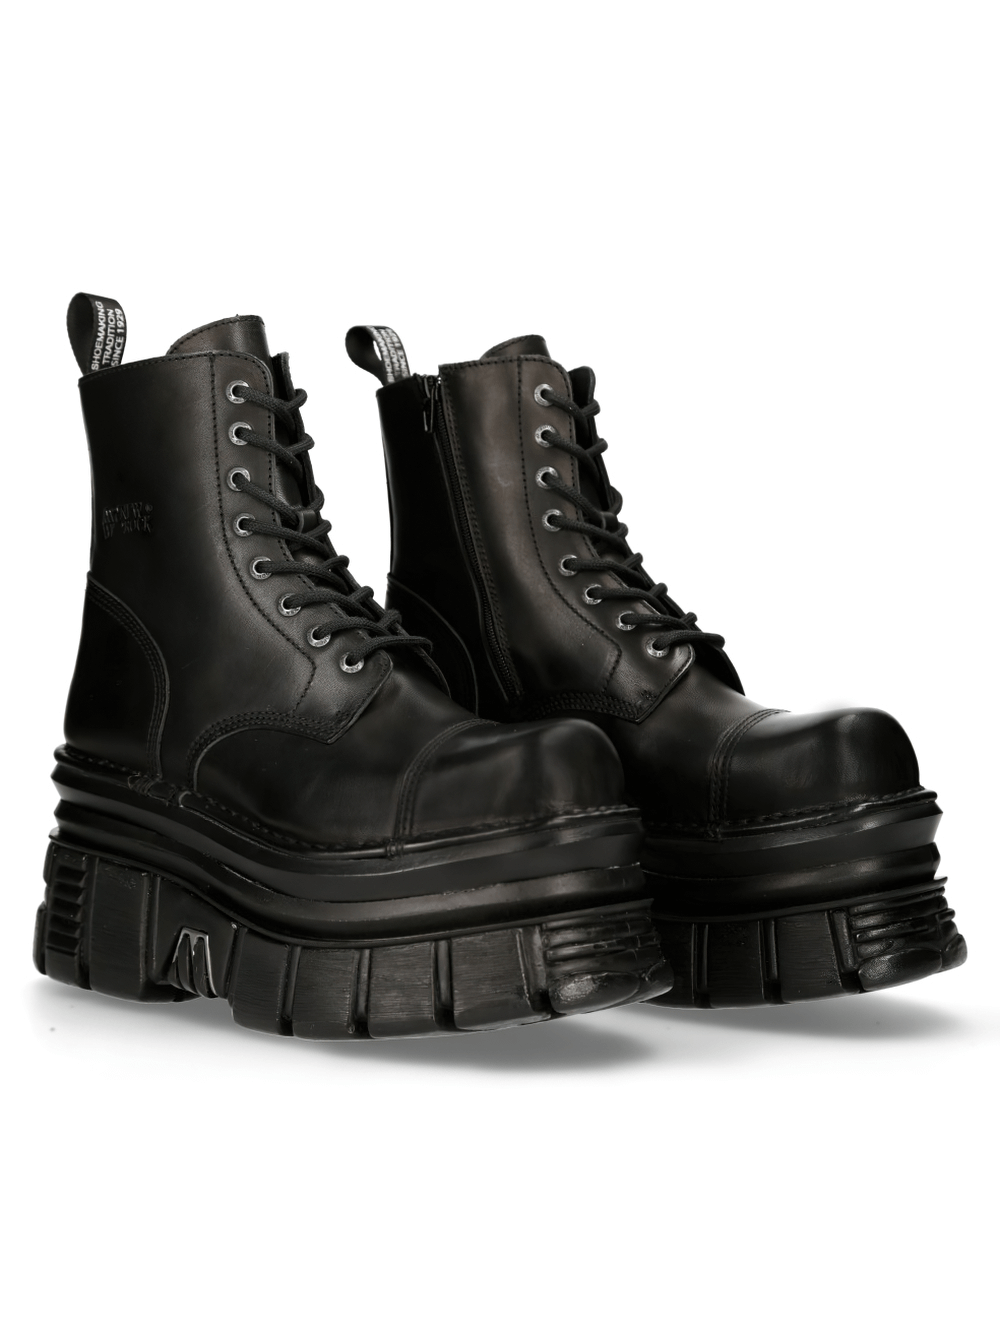 NEW ROCK Black Gothic Military Leather Ankle Boots